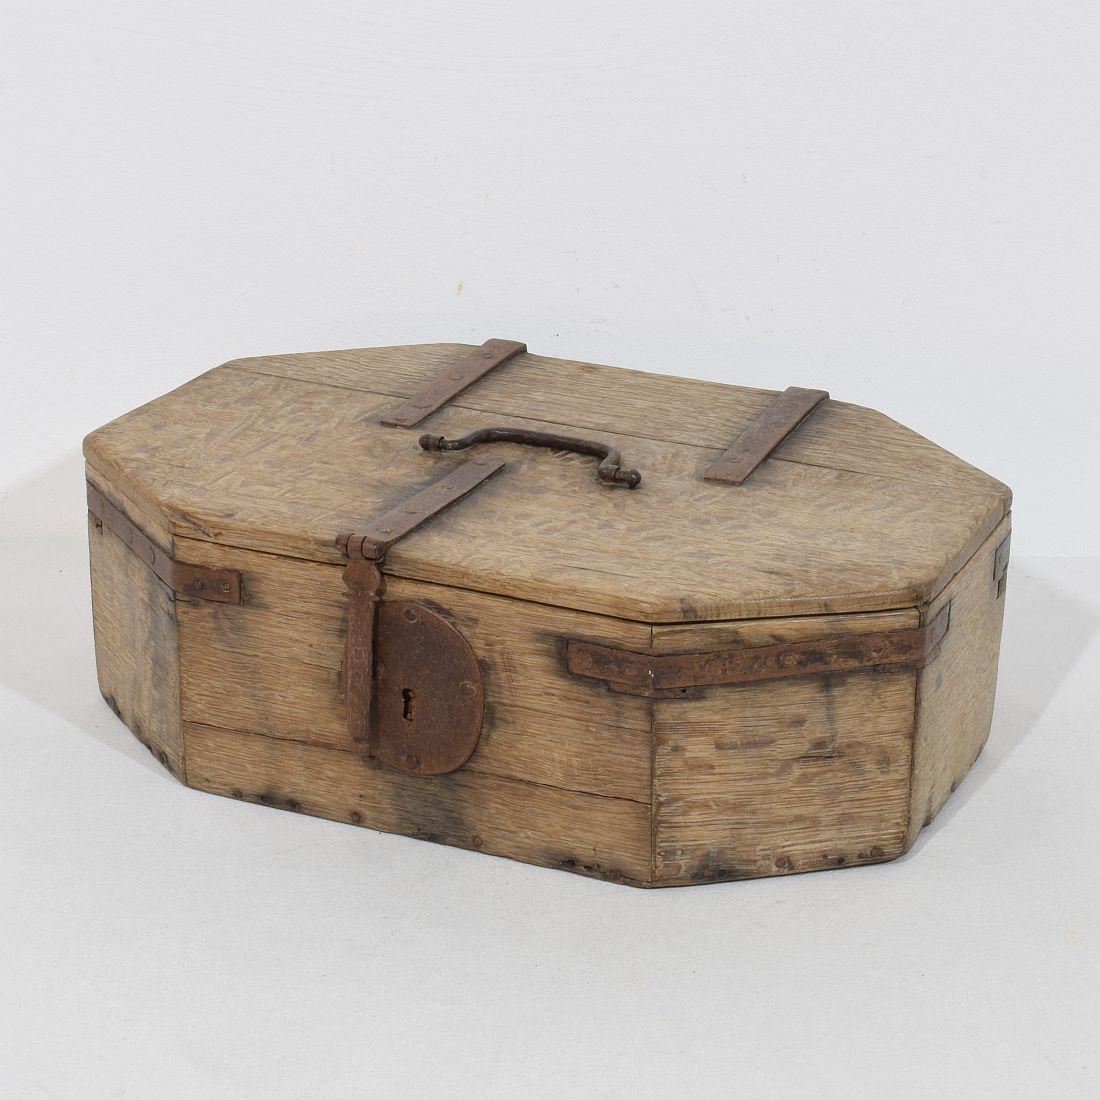 Extremely old and beautiful weathered oak box . Several old repairs that only add to the charm.
Rare find.
France, circa 1600-1700
Weathered, small losses and old repairs.
H:14,5cm  W:40,5cm D:29,5cm 